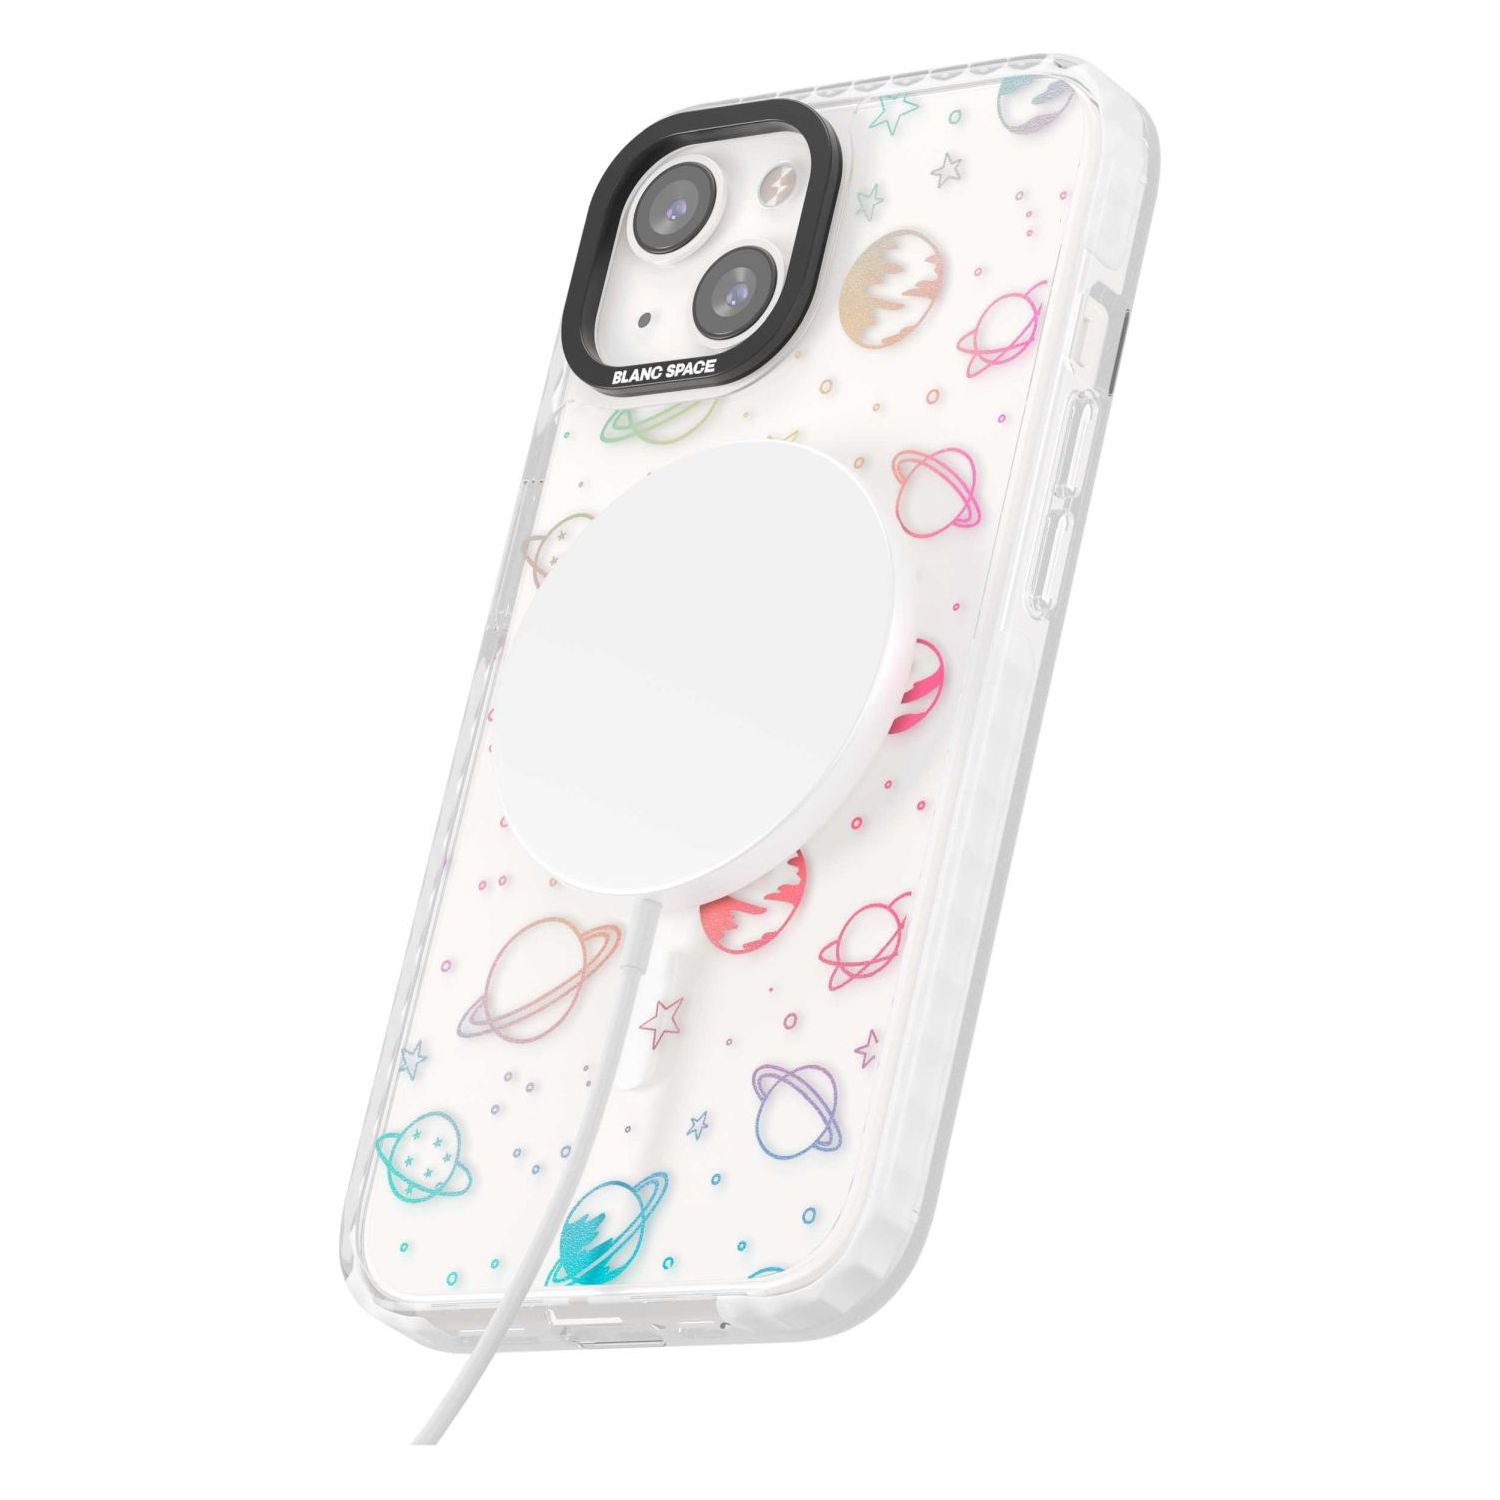 Cosmic Outer Space Design Pastels on Clear Phone Case iPhone 15 Pro Max / Black Impact Case,iPhone 15 Plus / Black Impact Case,iPhone 15 Pro / Black Impact Case,iPhone 15 / Black Impact Case,iPhone 15 Pro Max / Impact Case,iPhone 15 Plus / Impact Case,iPhone 15 Pro / Impact Case,iPhone 15 / Impact Case,iPhone 15 Pro Max / Magsafe Black Impact Case,iPhone 15 Plus / Magsafe Black Impact Case,iPhone 15 Pro / Magsafe Black Impact Case,iPhone 15 / Magsafe Black Impact Case,iPhone 14 Pro Max / Black Impact Case,i